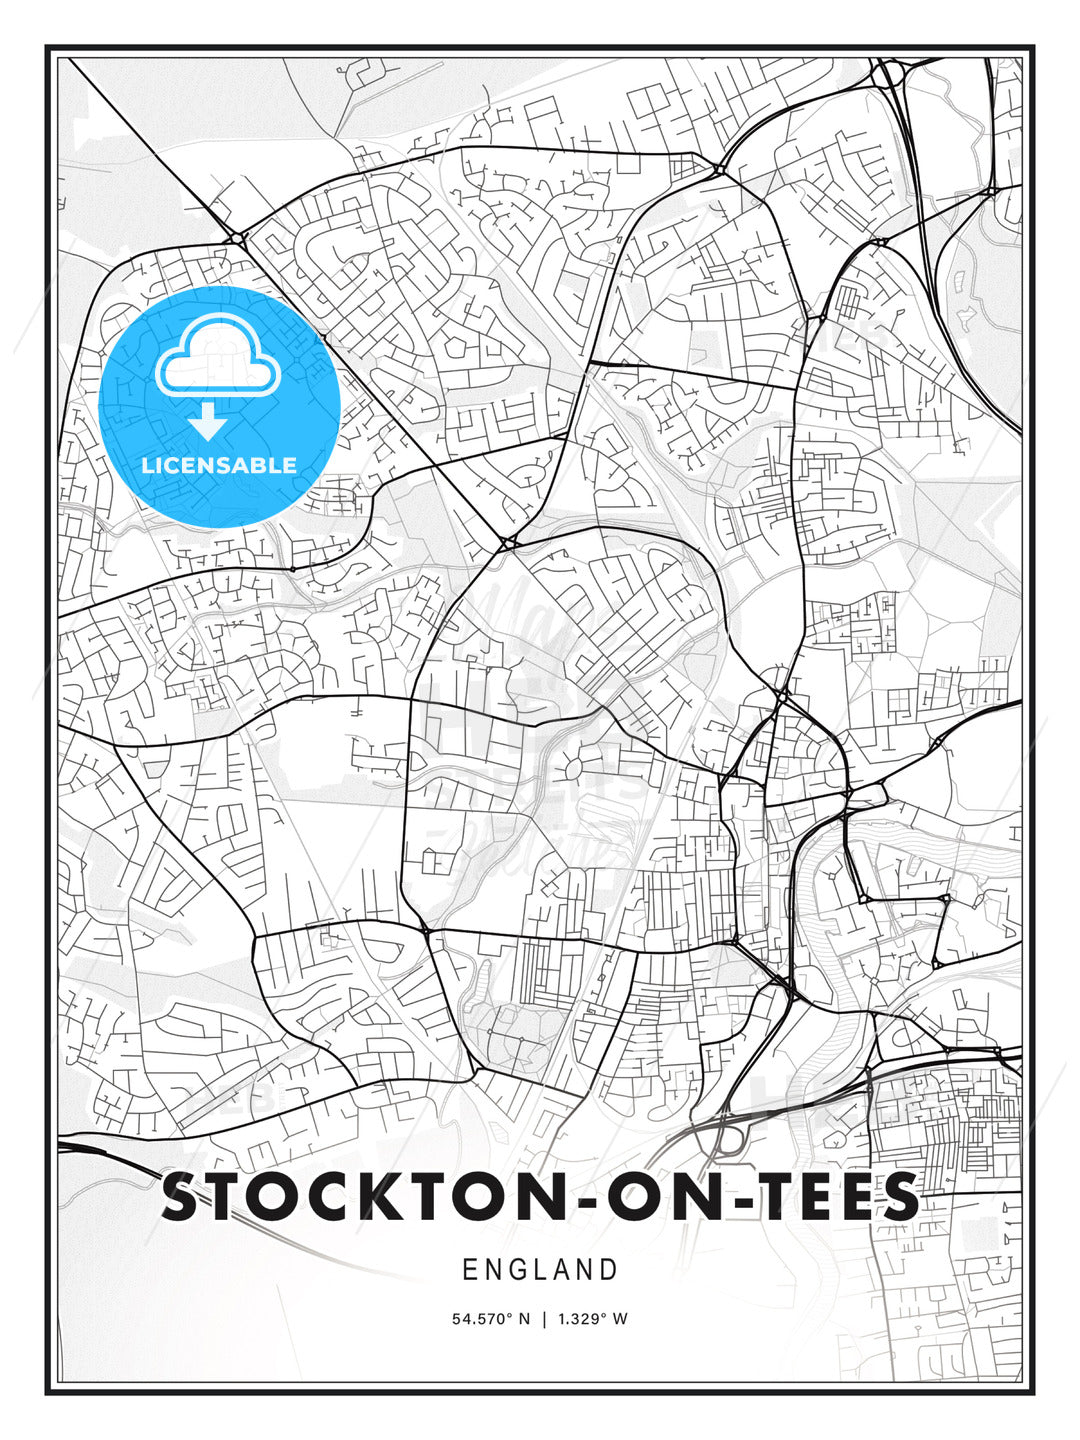 Stockton-on-Tees, England, Modern Print Template in Various Formats - HEBSTREITS Sketches